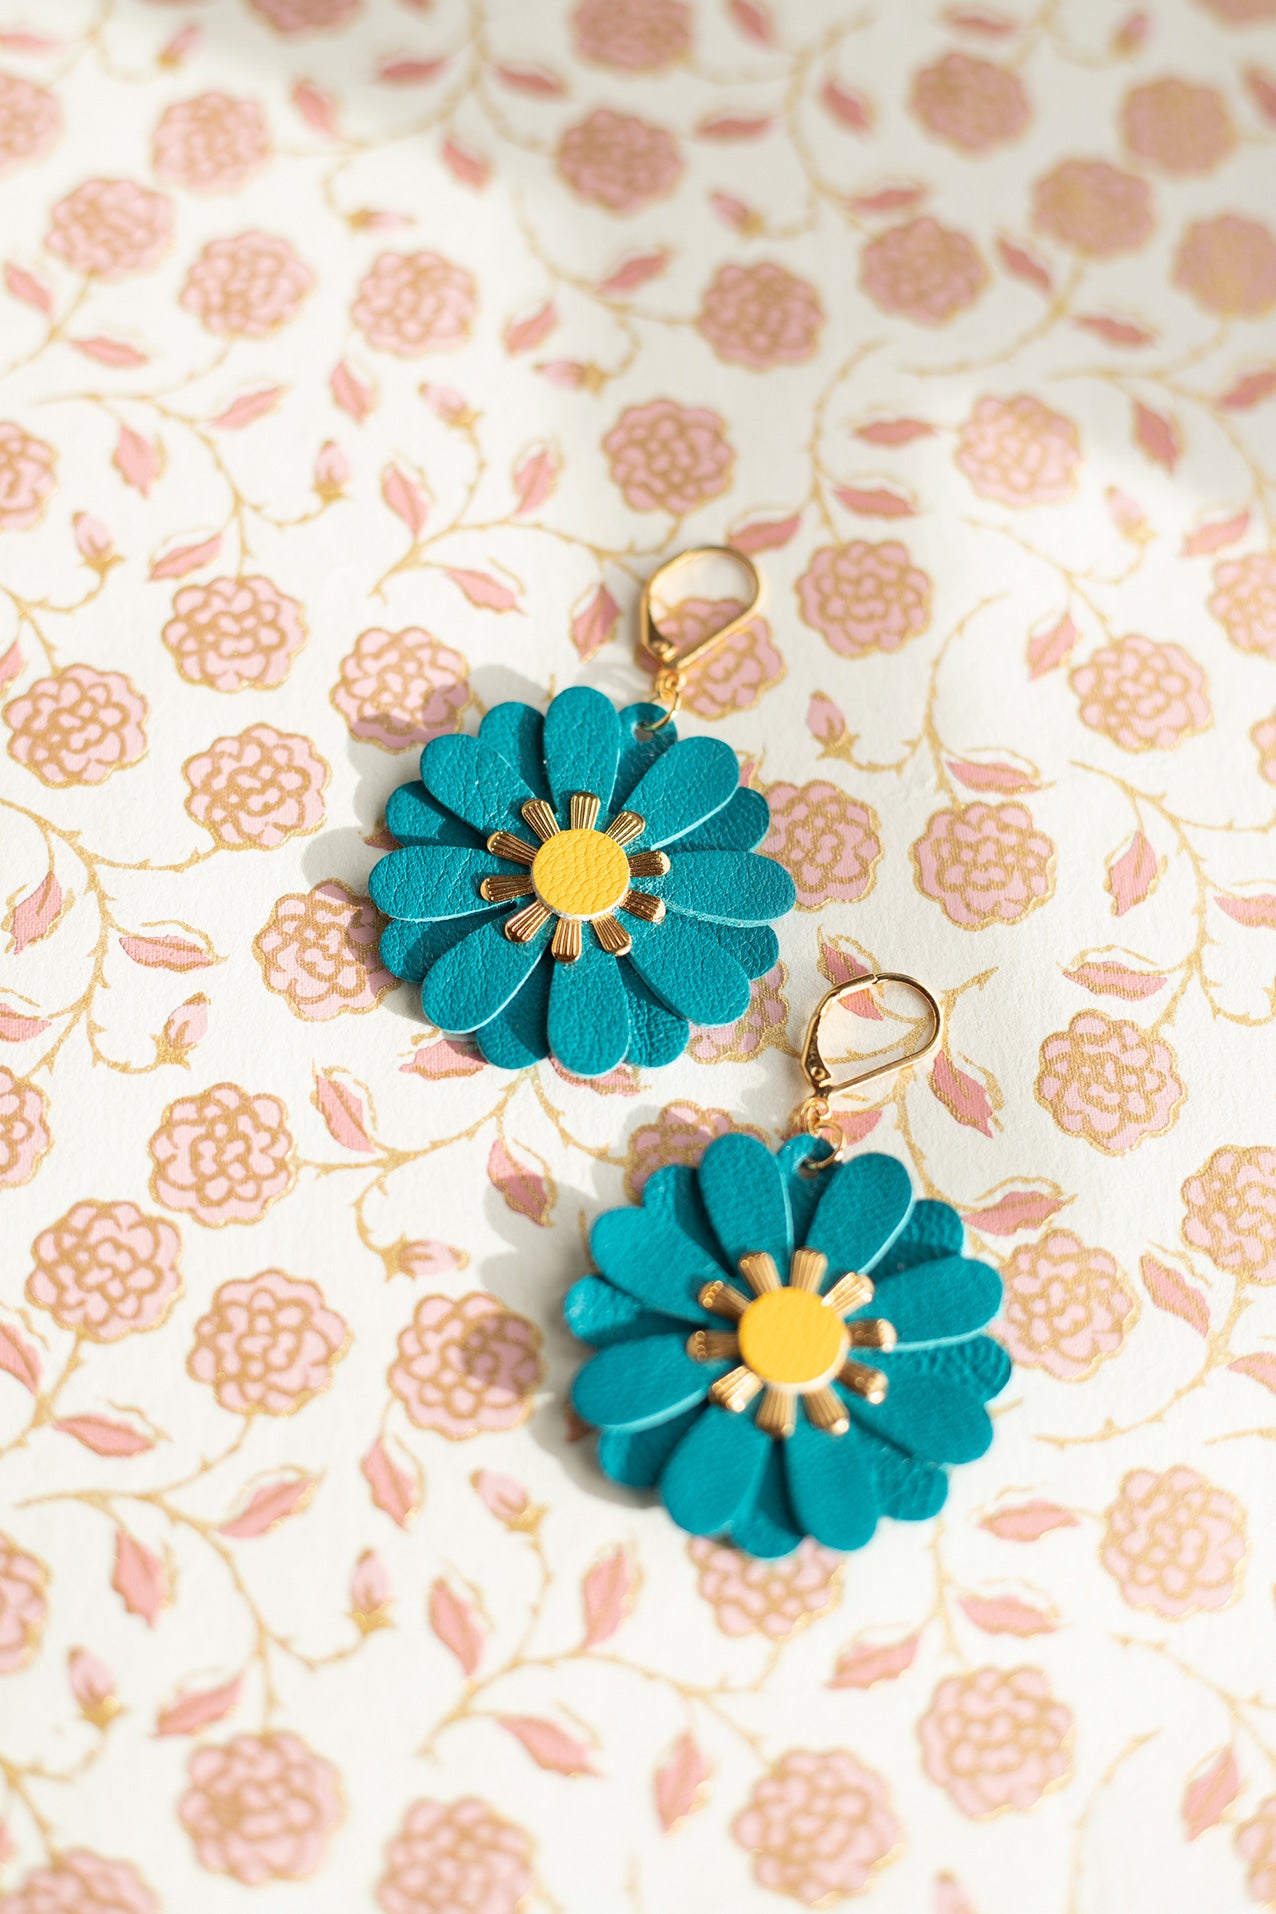 Zinnia flower earrings - duck blue and yellow leather